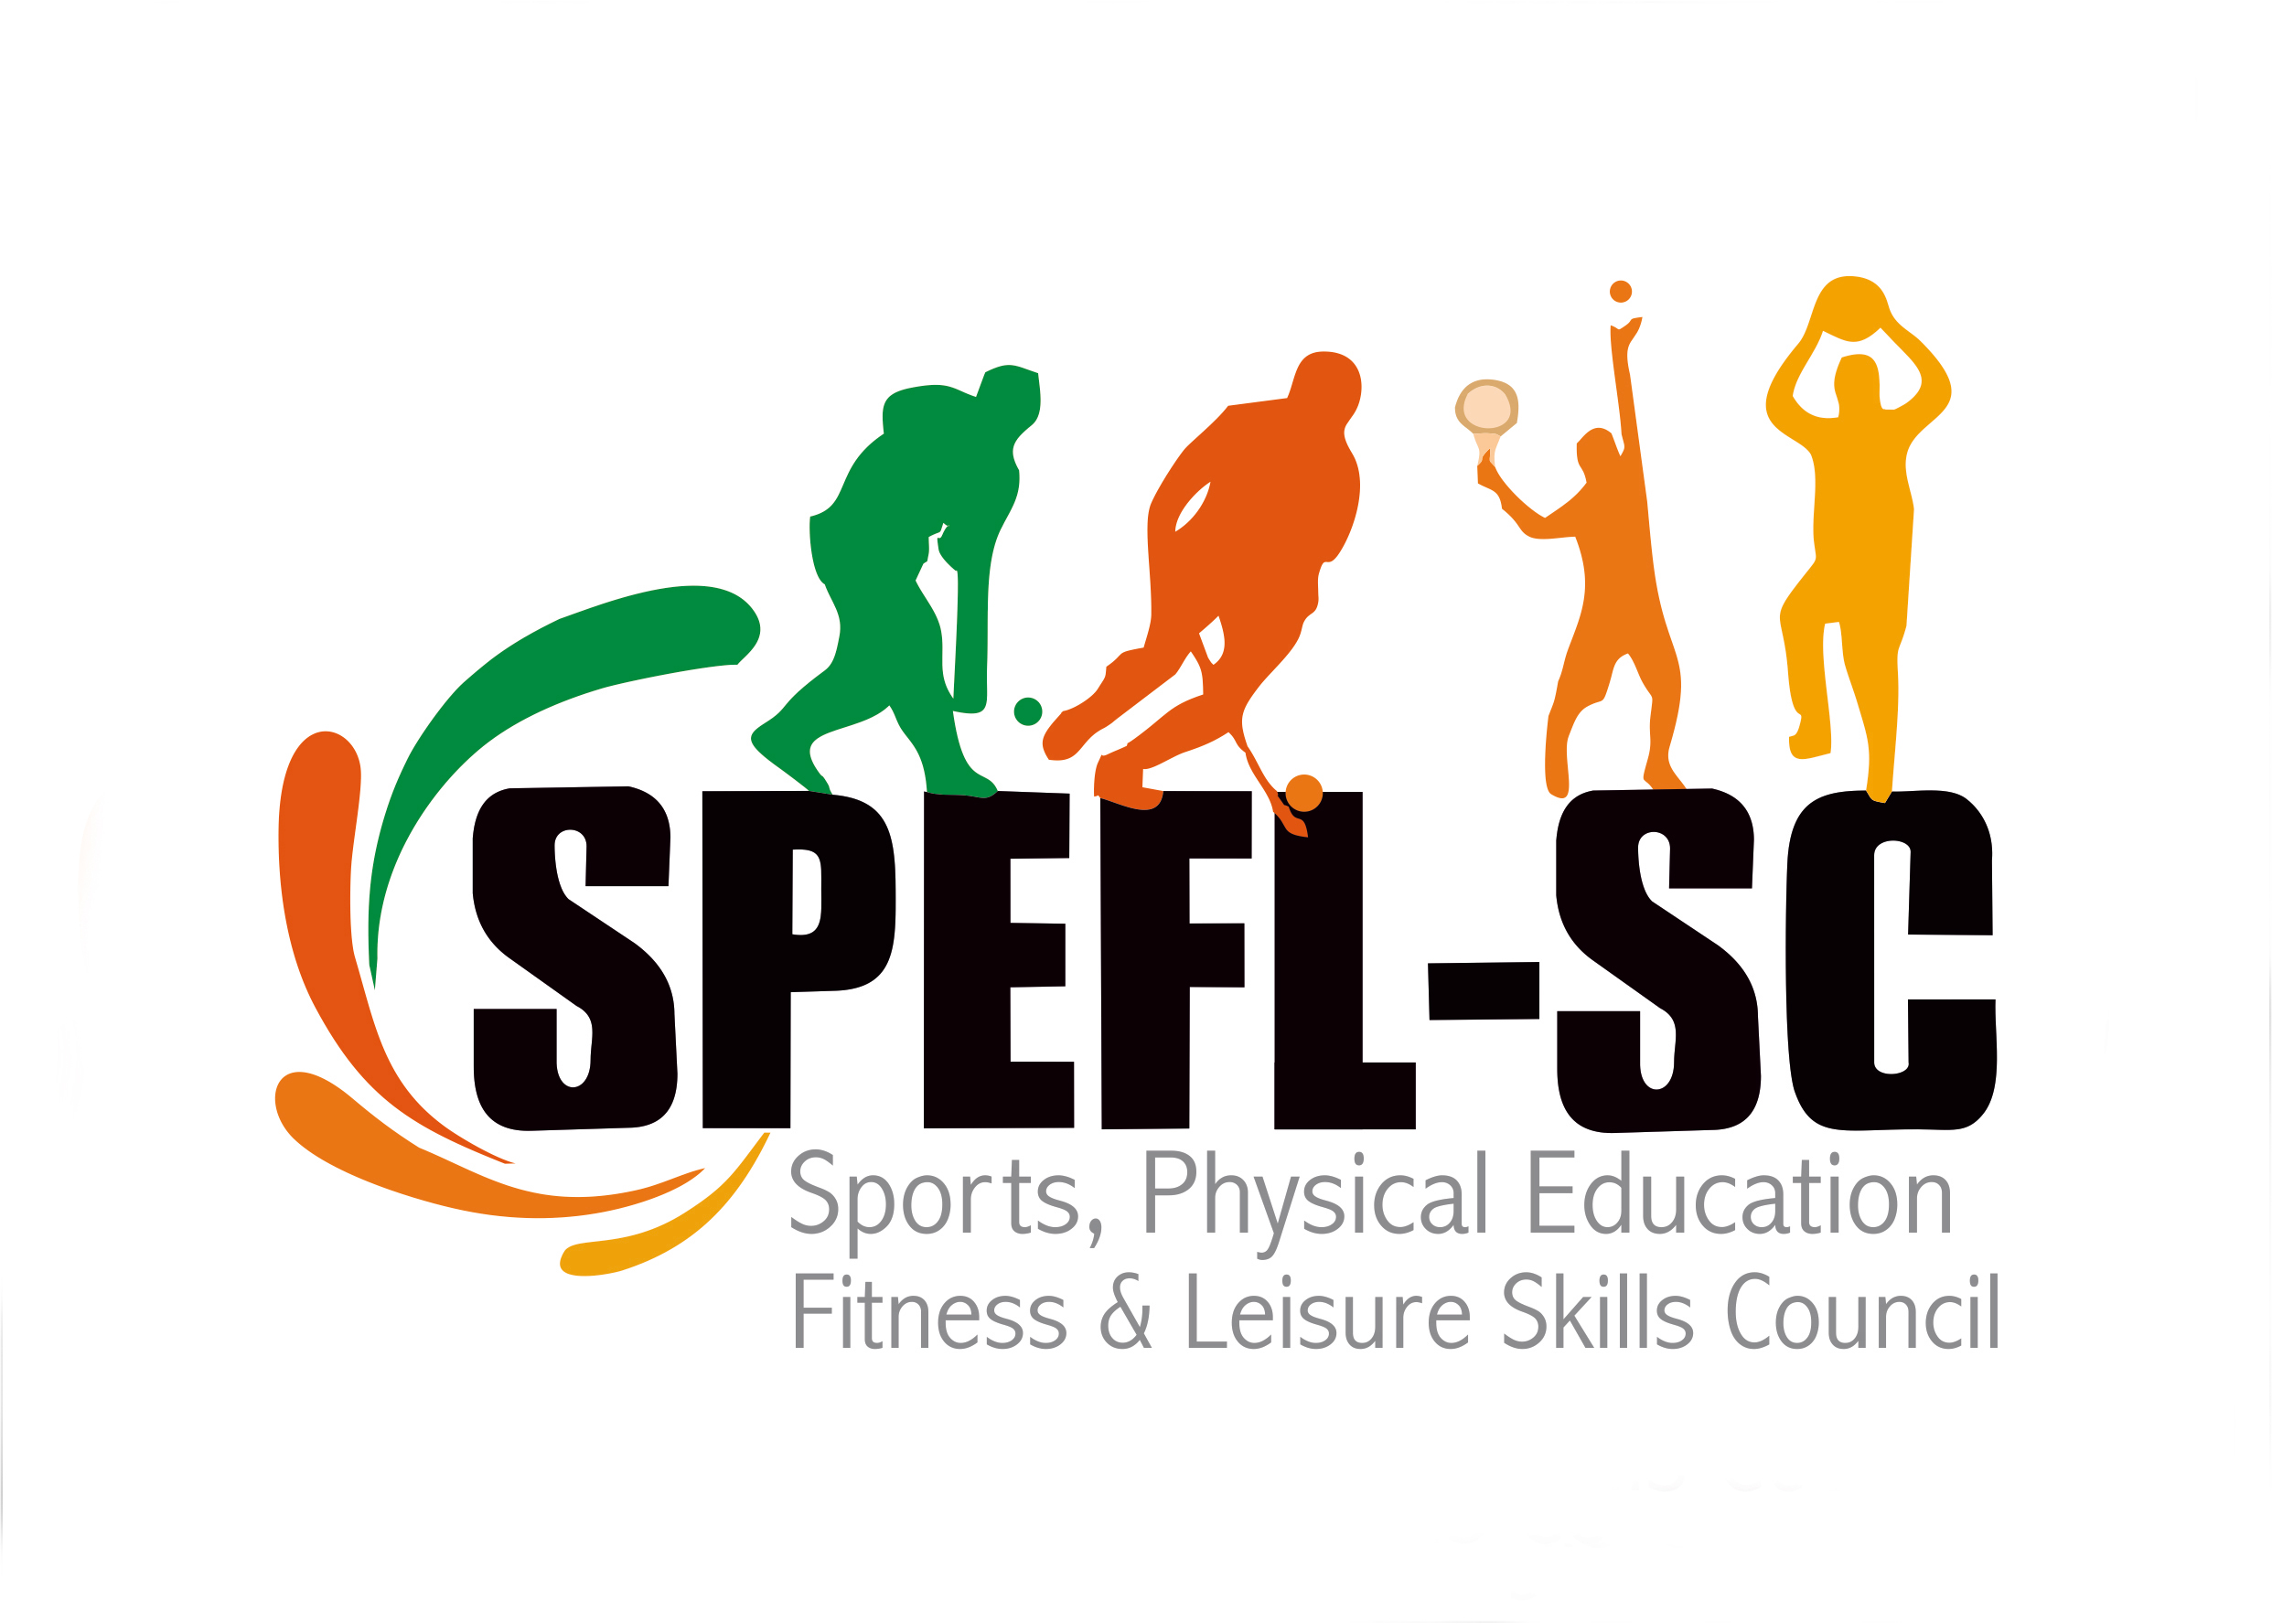 K11 is affiliated with the Sports, Physical Education, Fitness and Leisure Skills Council (SPEFL-SC)